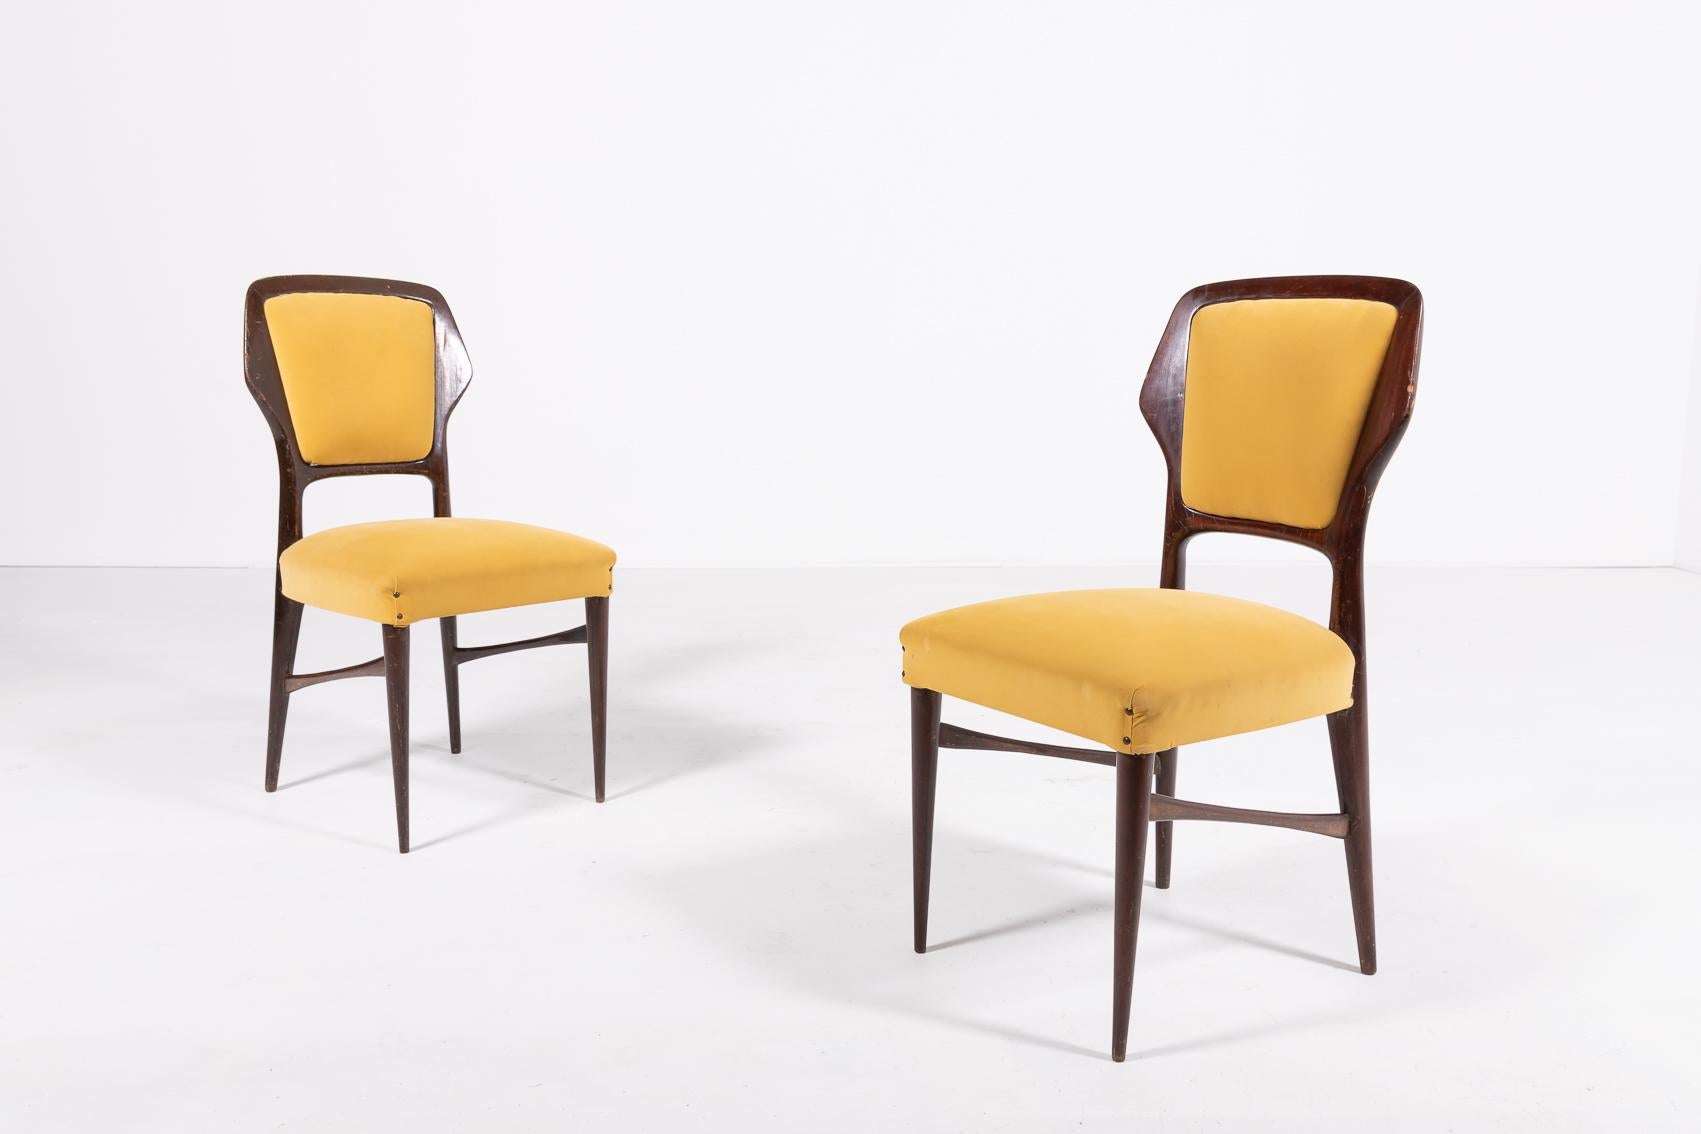 1960’s set of 6 Italian Modern Sculptural chairs from Vittorio Dassi. The chairs have varnished walnut frame, original velvet upholstery.

Condition
Good, age related wear. Some scratches on a wood frame and marks o the seat.

Dimensions
width: 46